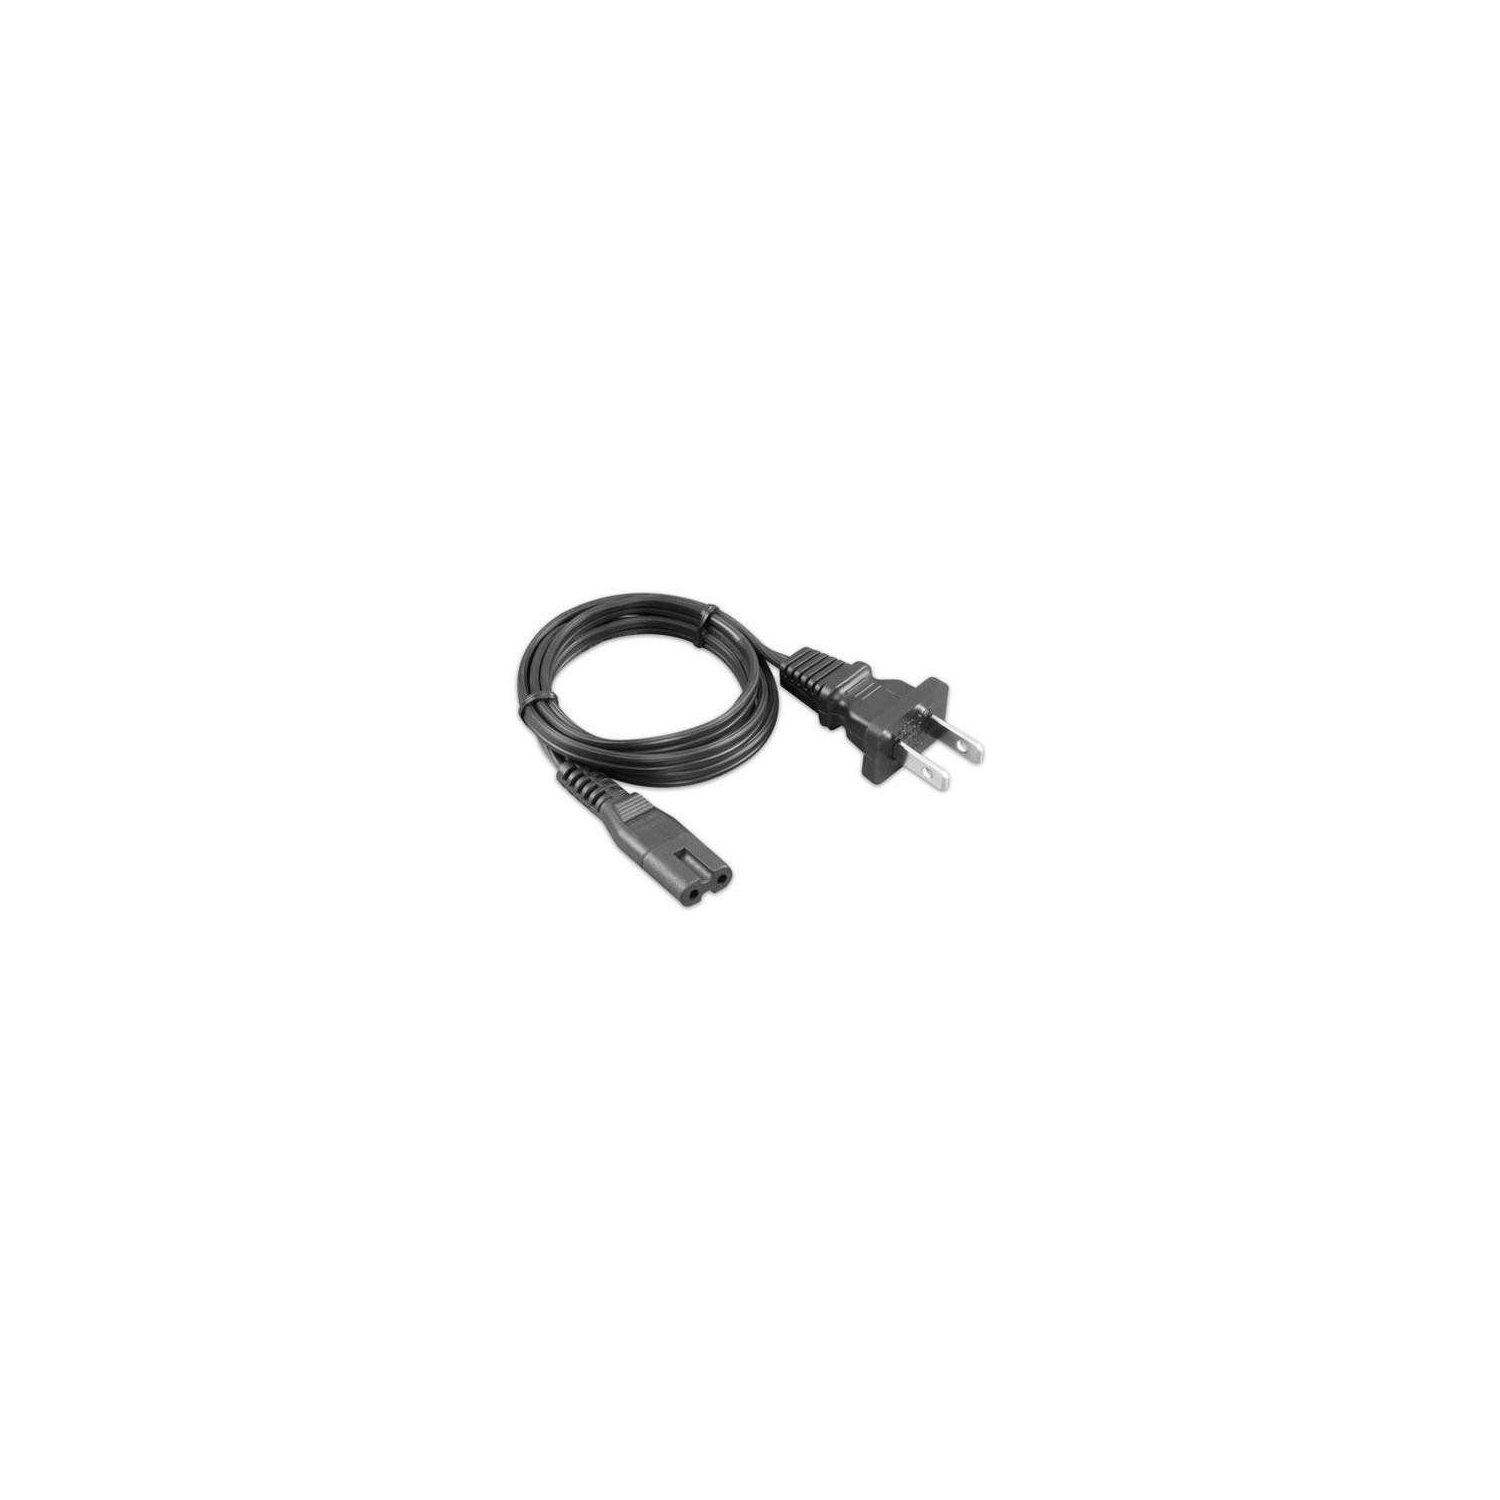 Power Cable Cord for HP Officejet Pro 8600, 8610, 8620, 8630, 251dw, X476dw, X576dw Printer